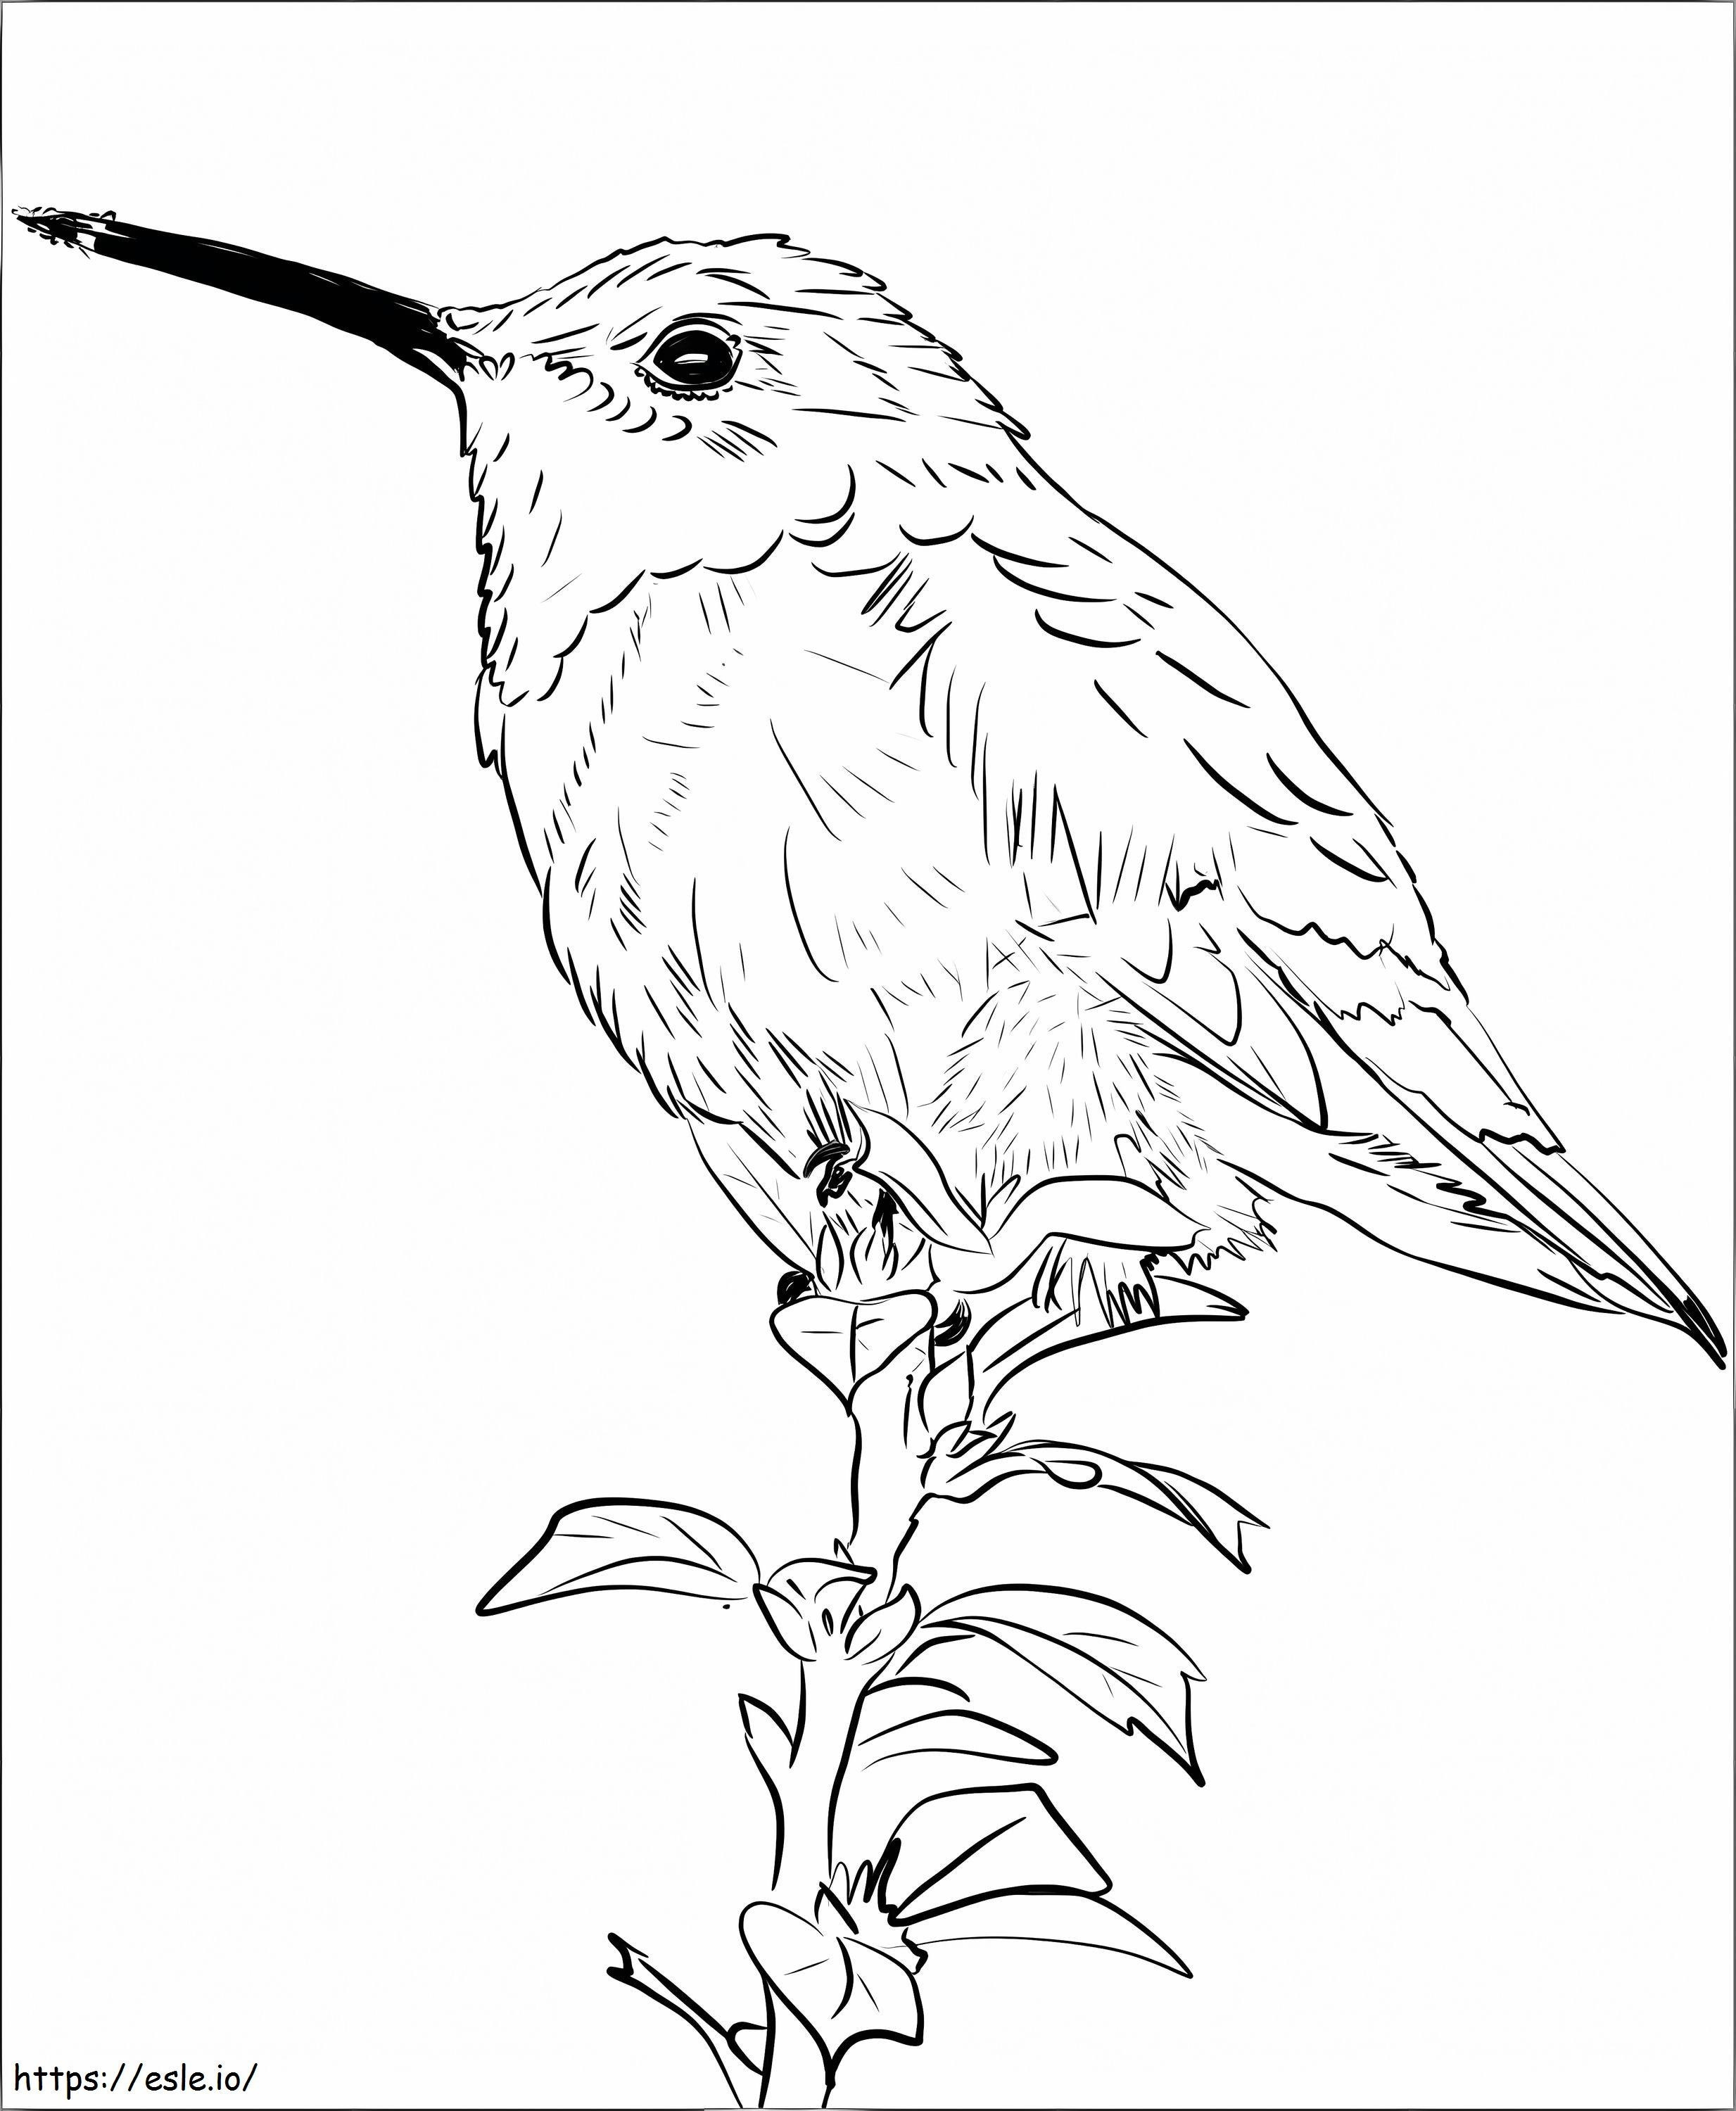 Hummingbird Perched On Flower coloring page